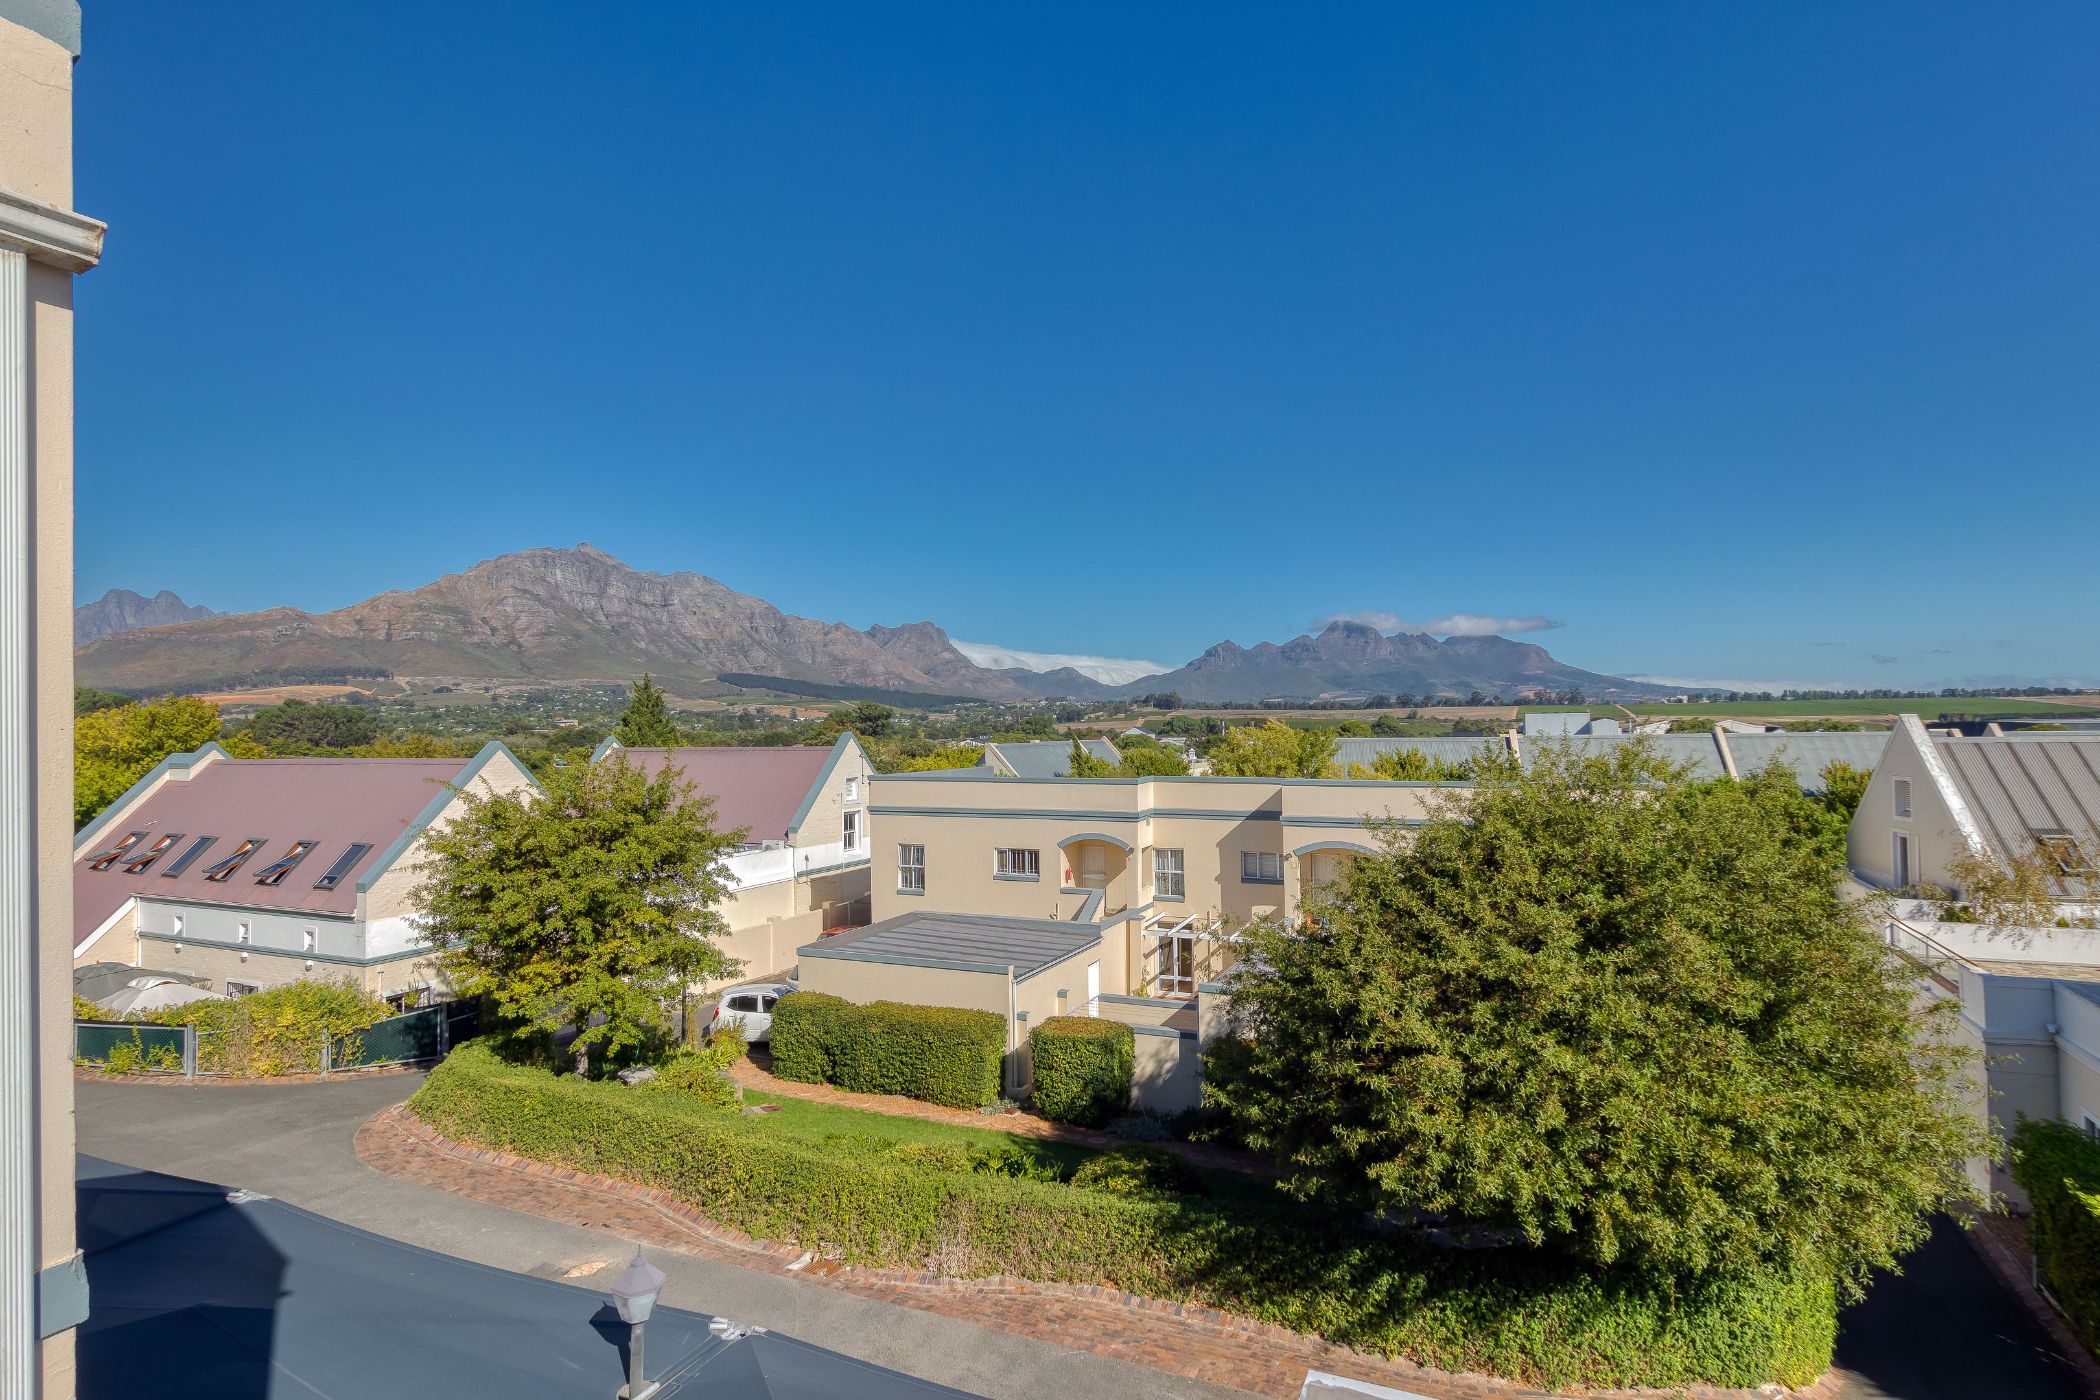 3 bedroom penthouse apartment for sale in Stellenbosch Central